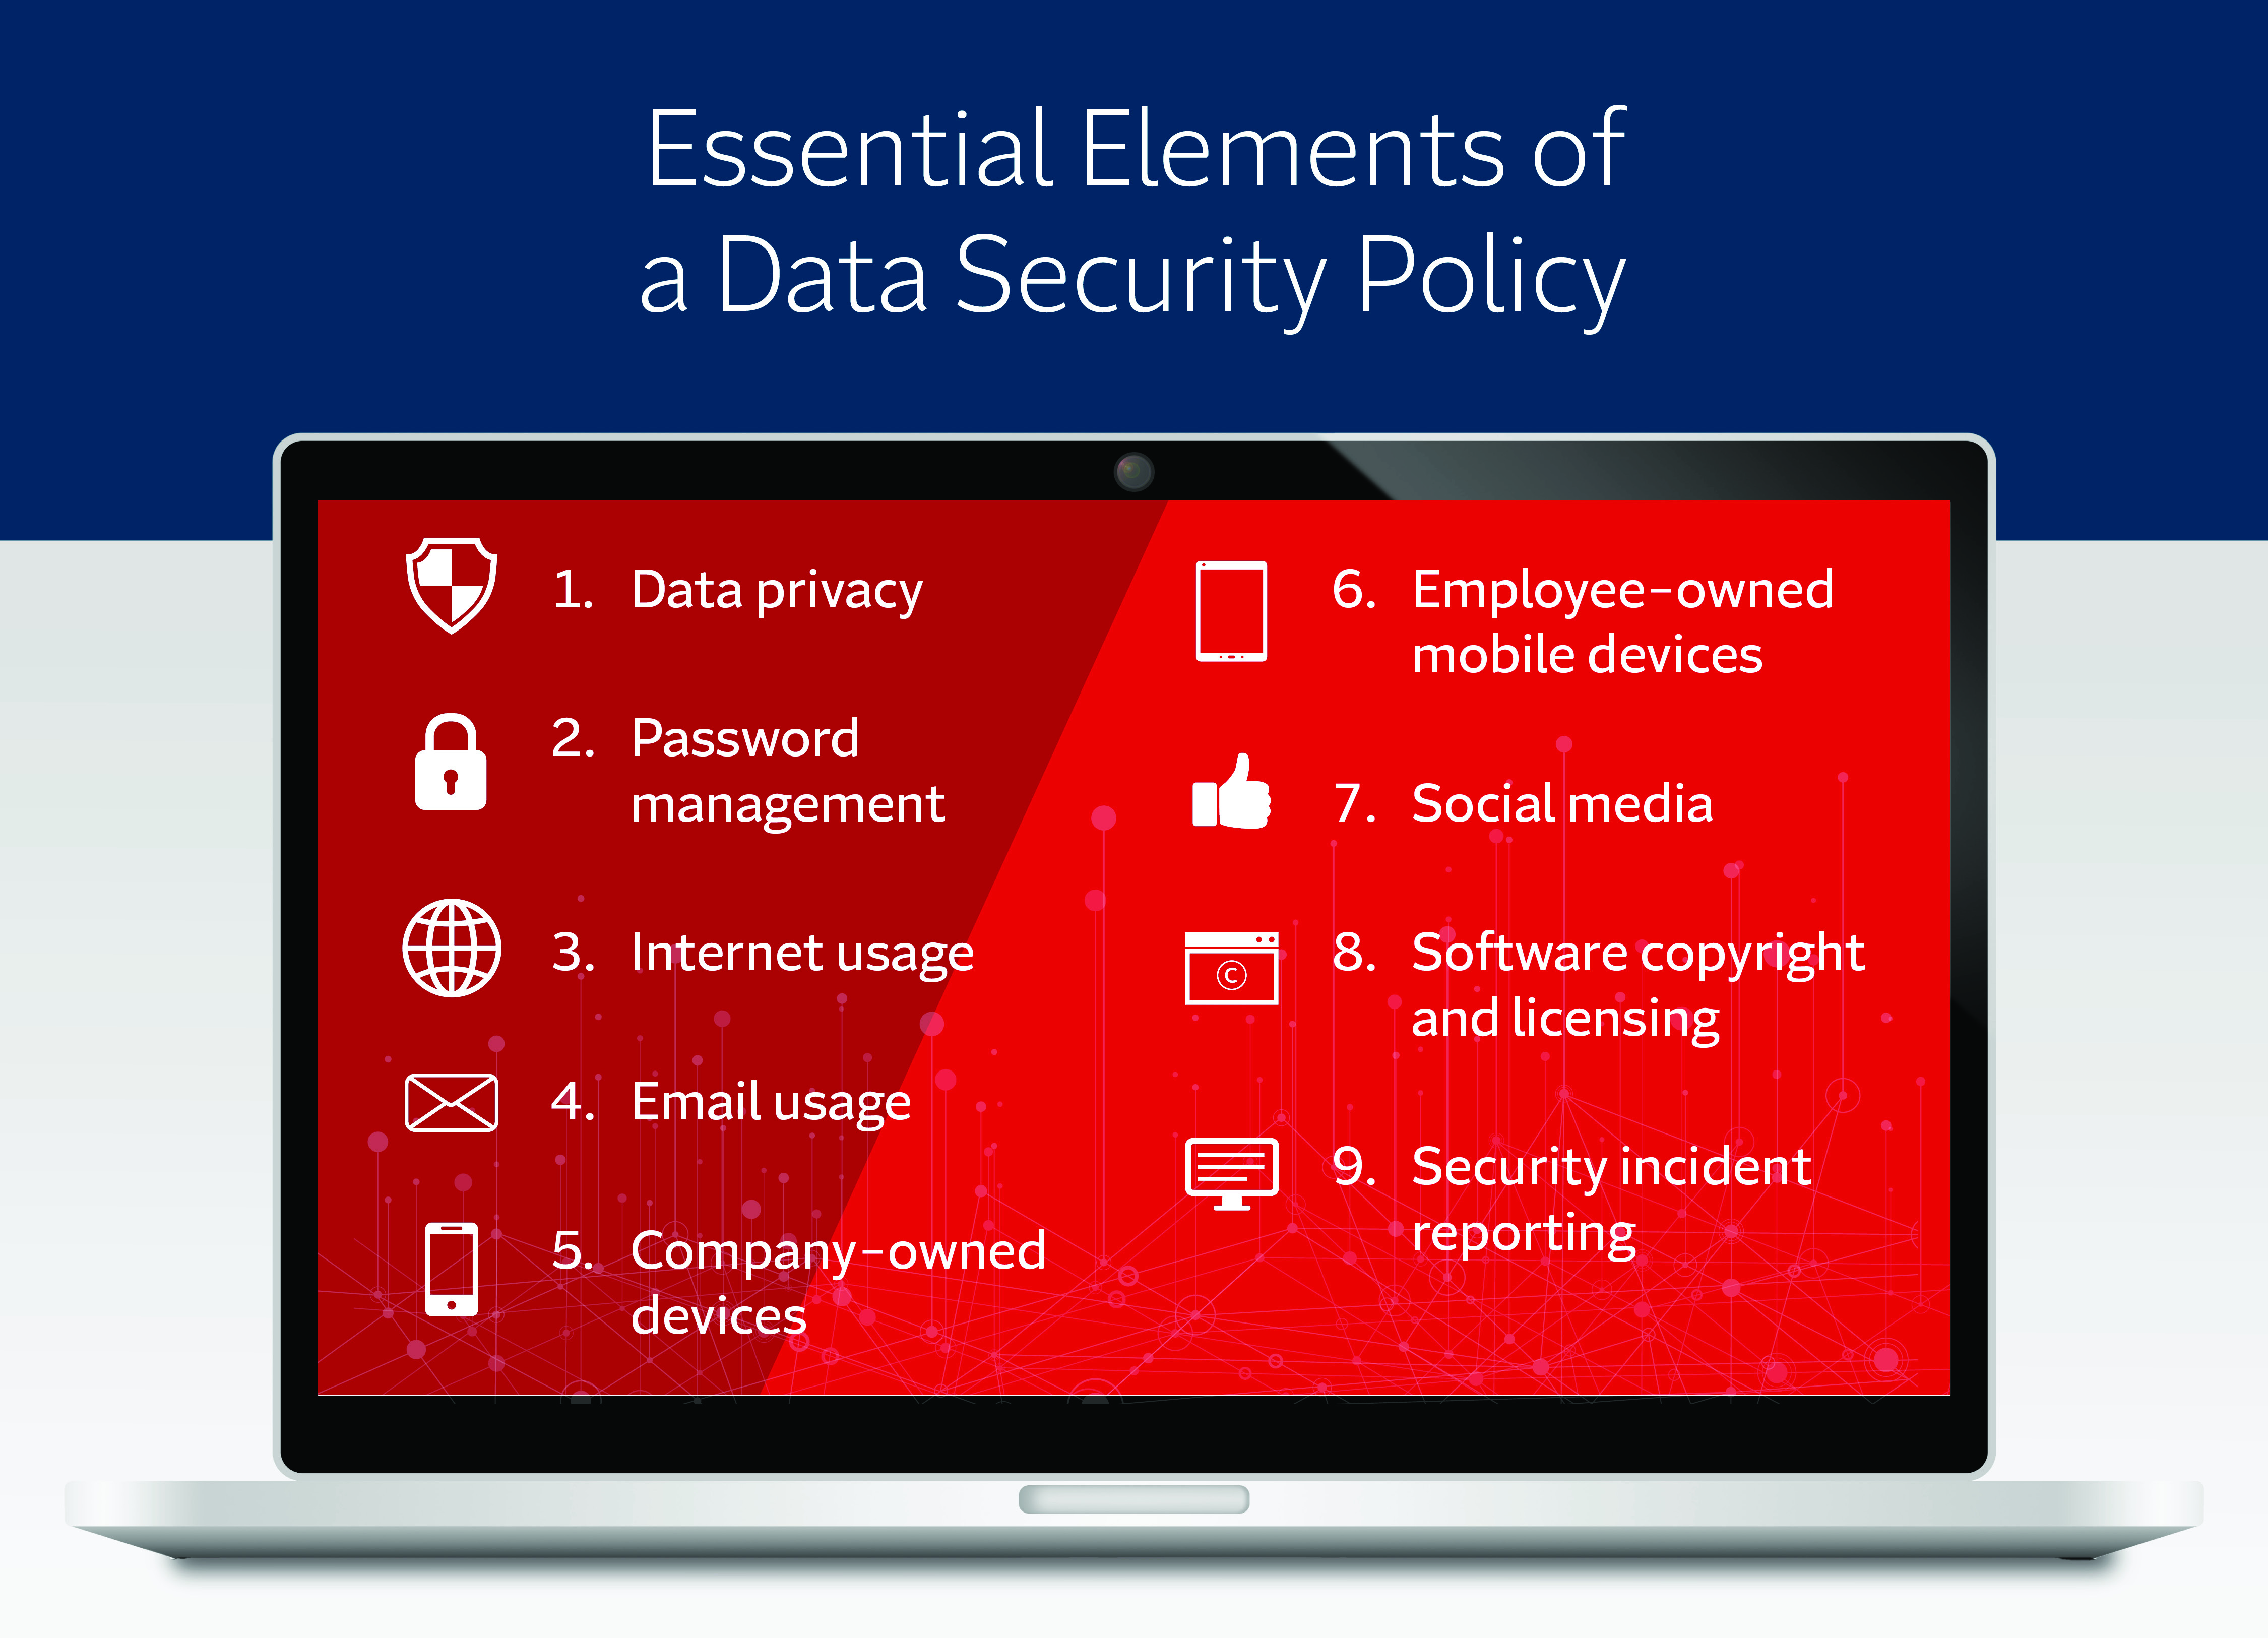 Essential Elements of a Data Security Policy, see details below